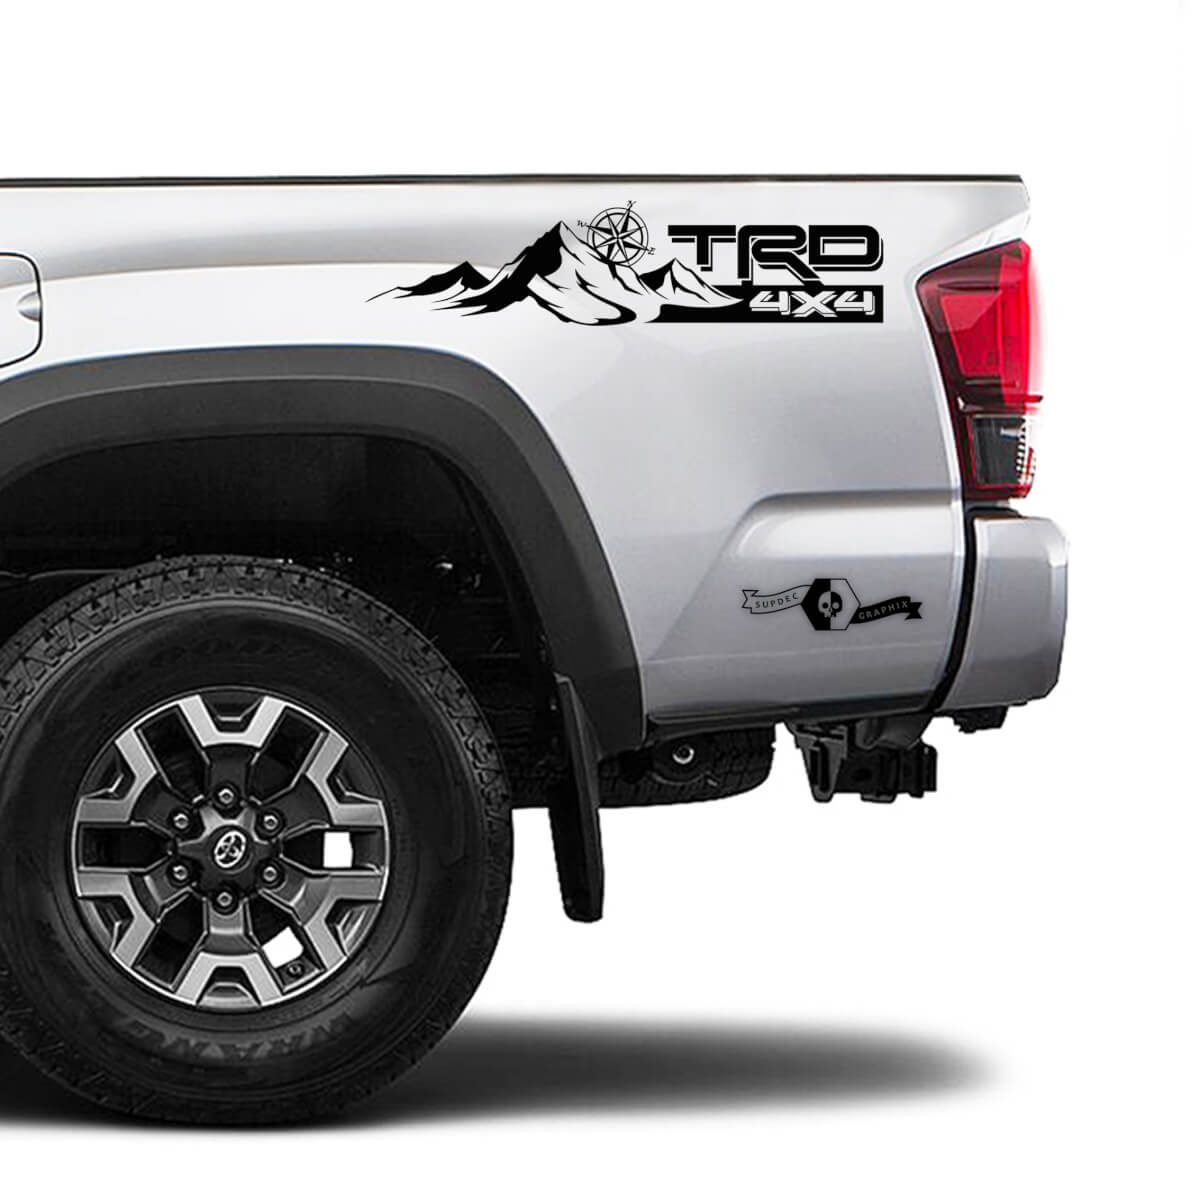 TRD 4x4 Off Road TOYOTA  Mountain Compass Wind Rose Decals Stickers for Tacoma Tundra 4Runner Hilux side